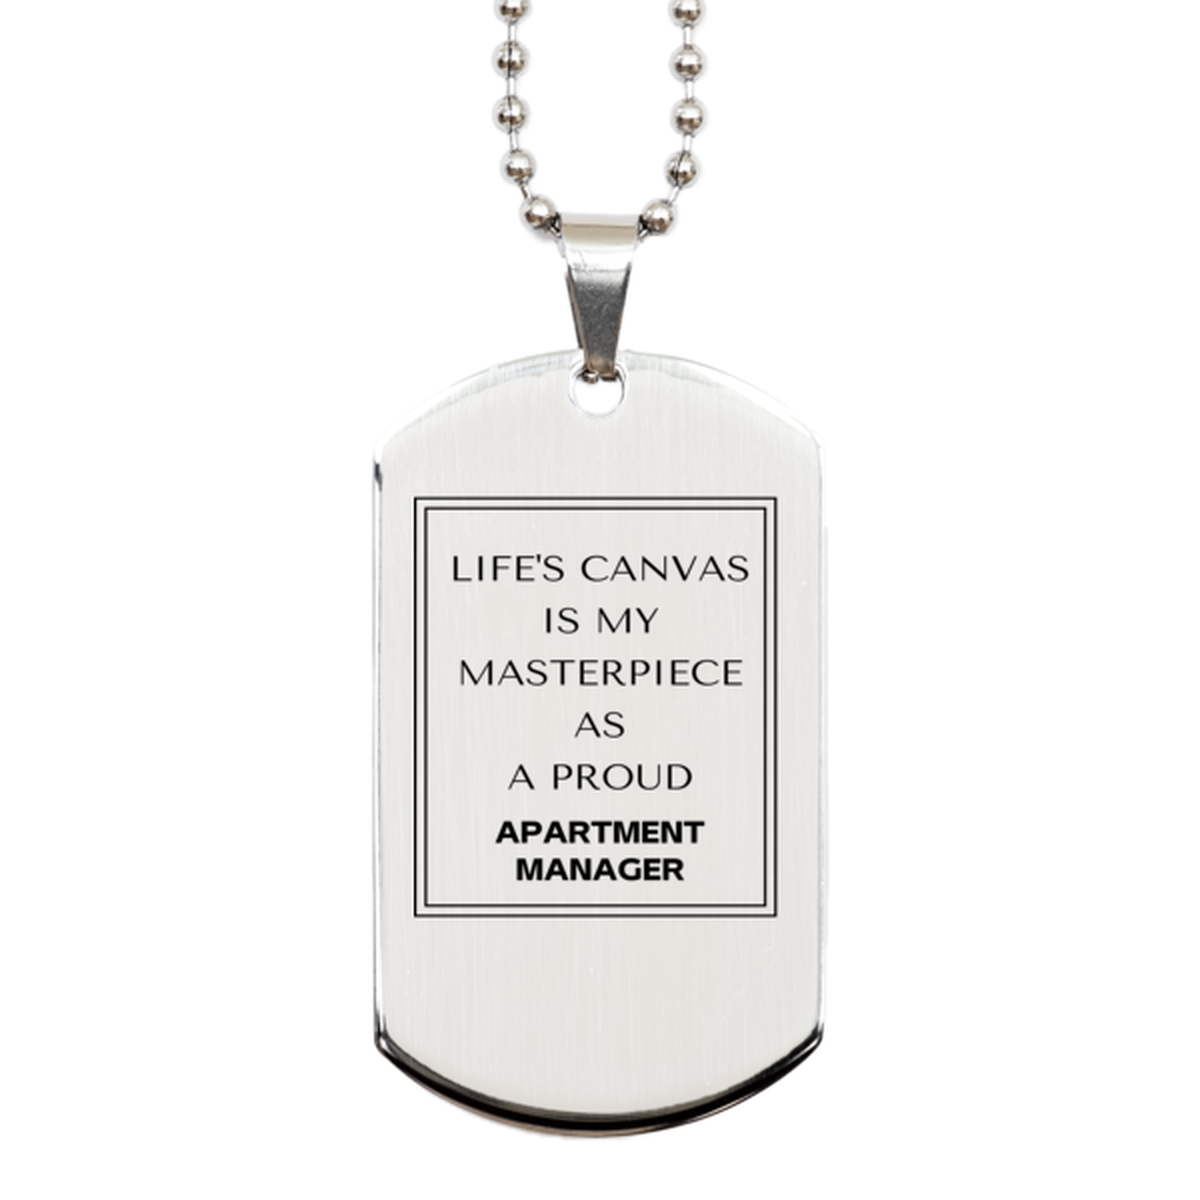 Proud Apartment Manager Gifts, Life's canvas is my masterpiece, Epic Birthday Christmas Unique Silver Dog Tag For Apartment Manager, Coworkers, Men, Women, Friends